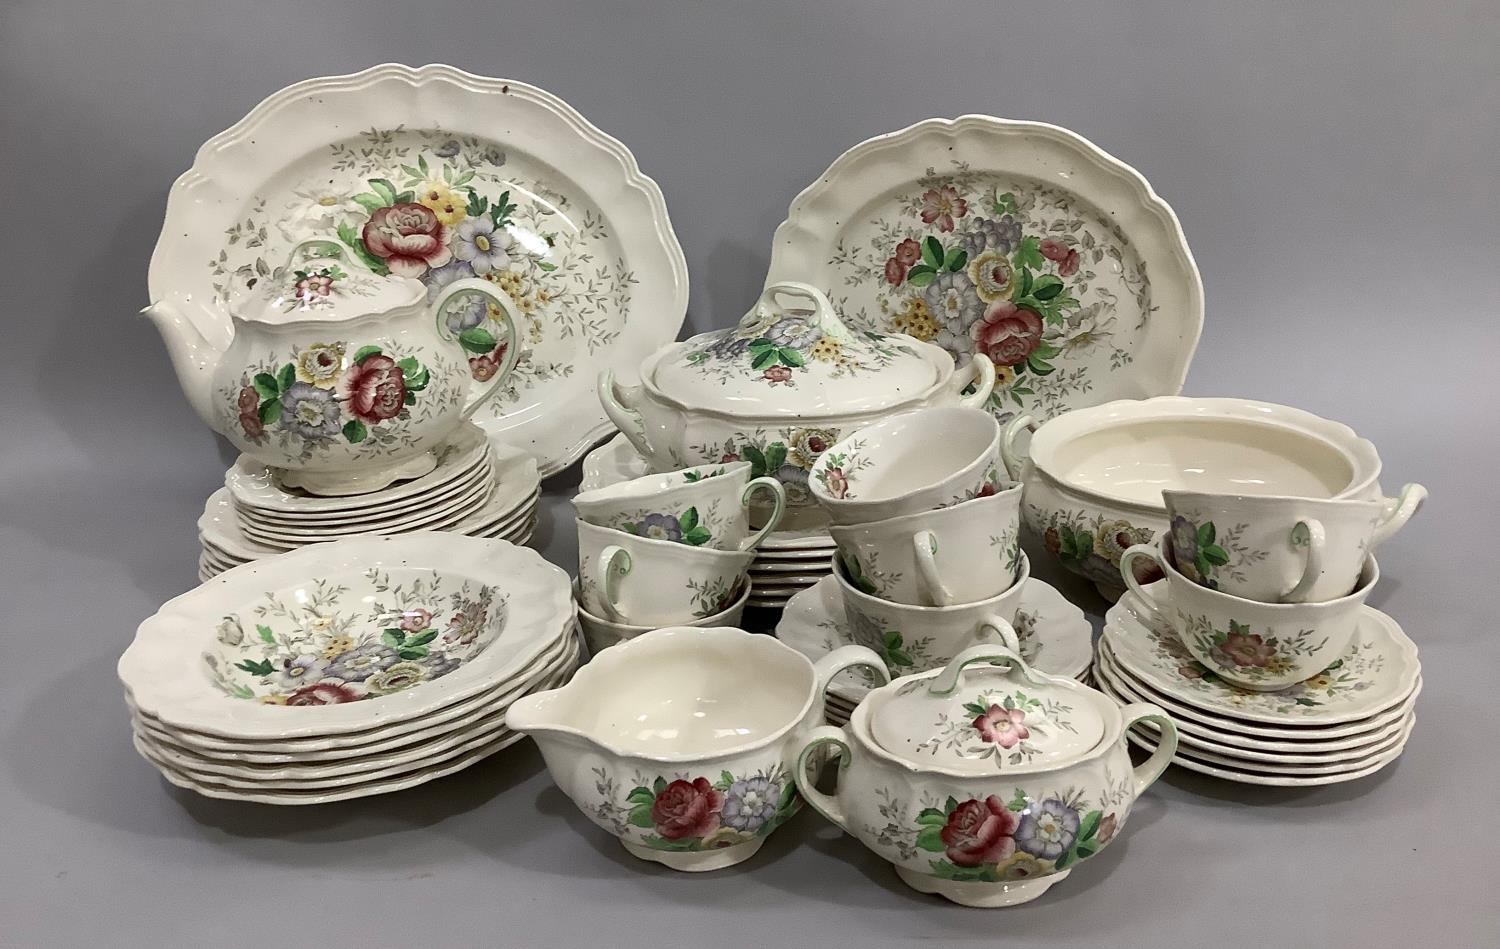 A Royal Doulton Malvern pattern china dinner and tea services comprising seven dinner plates, two